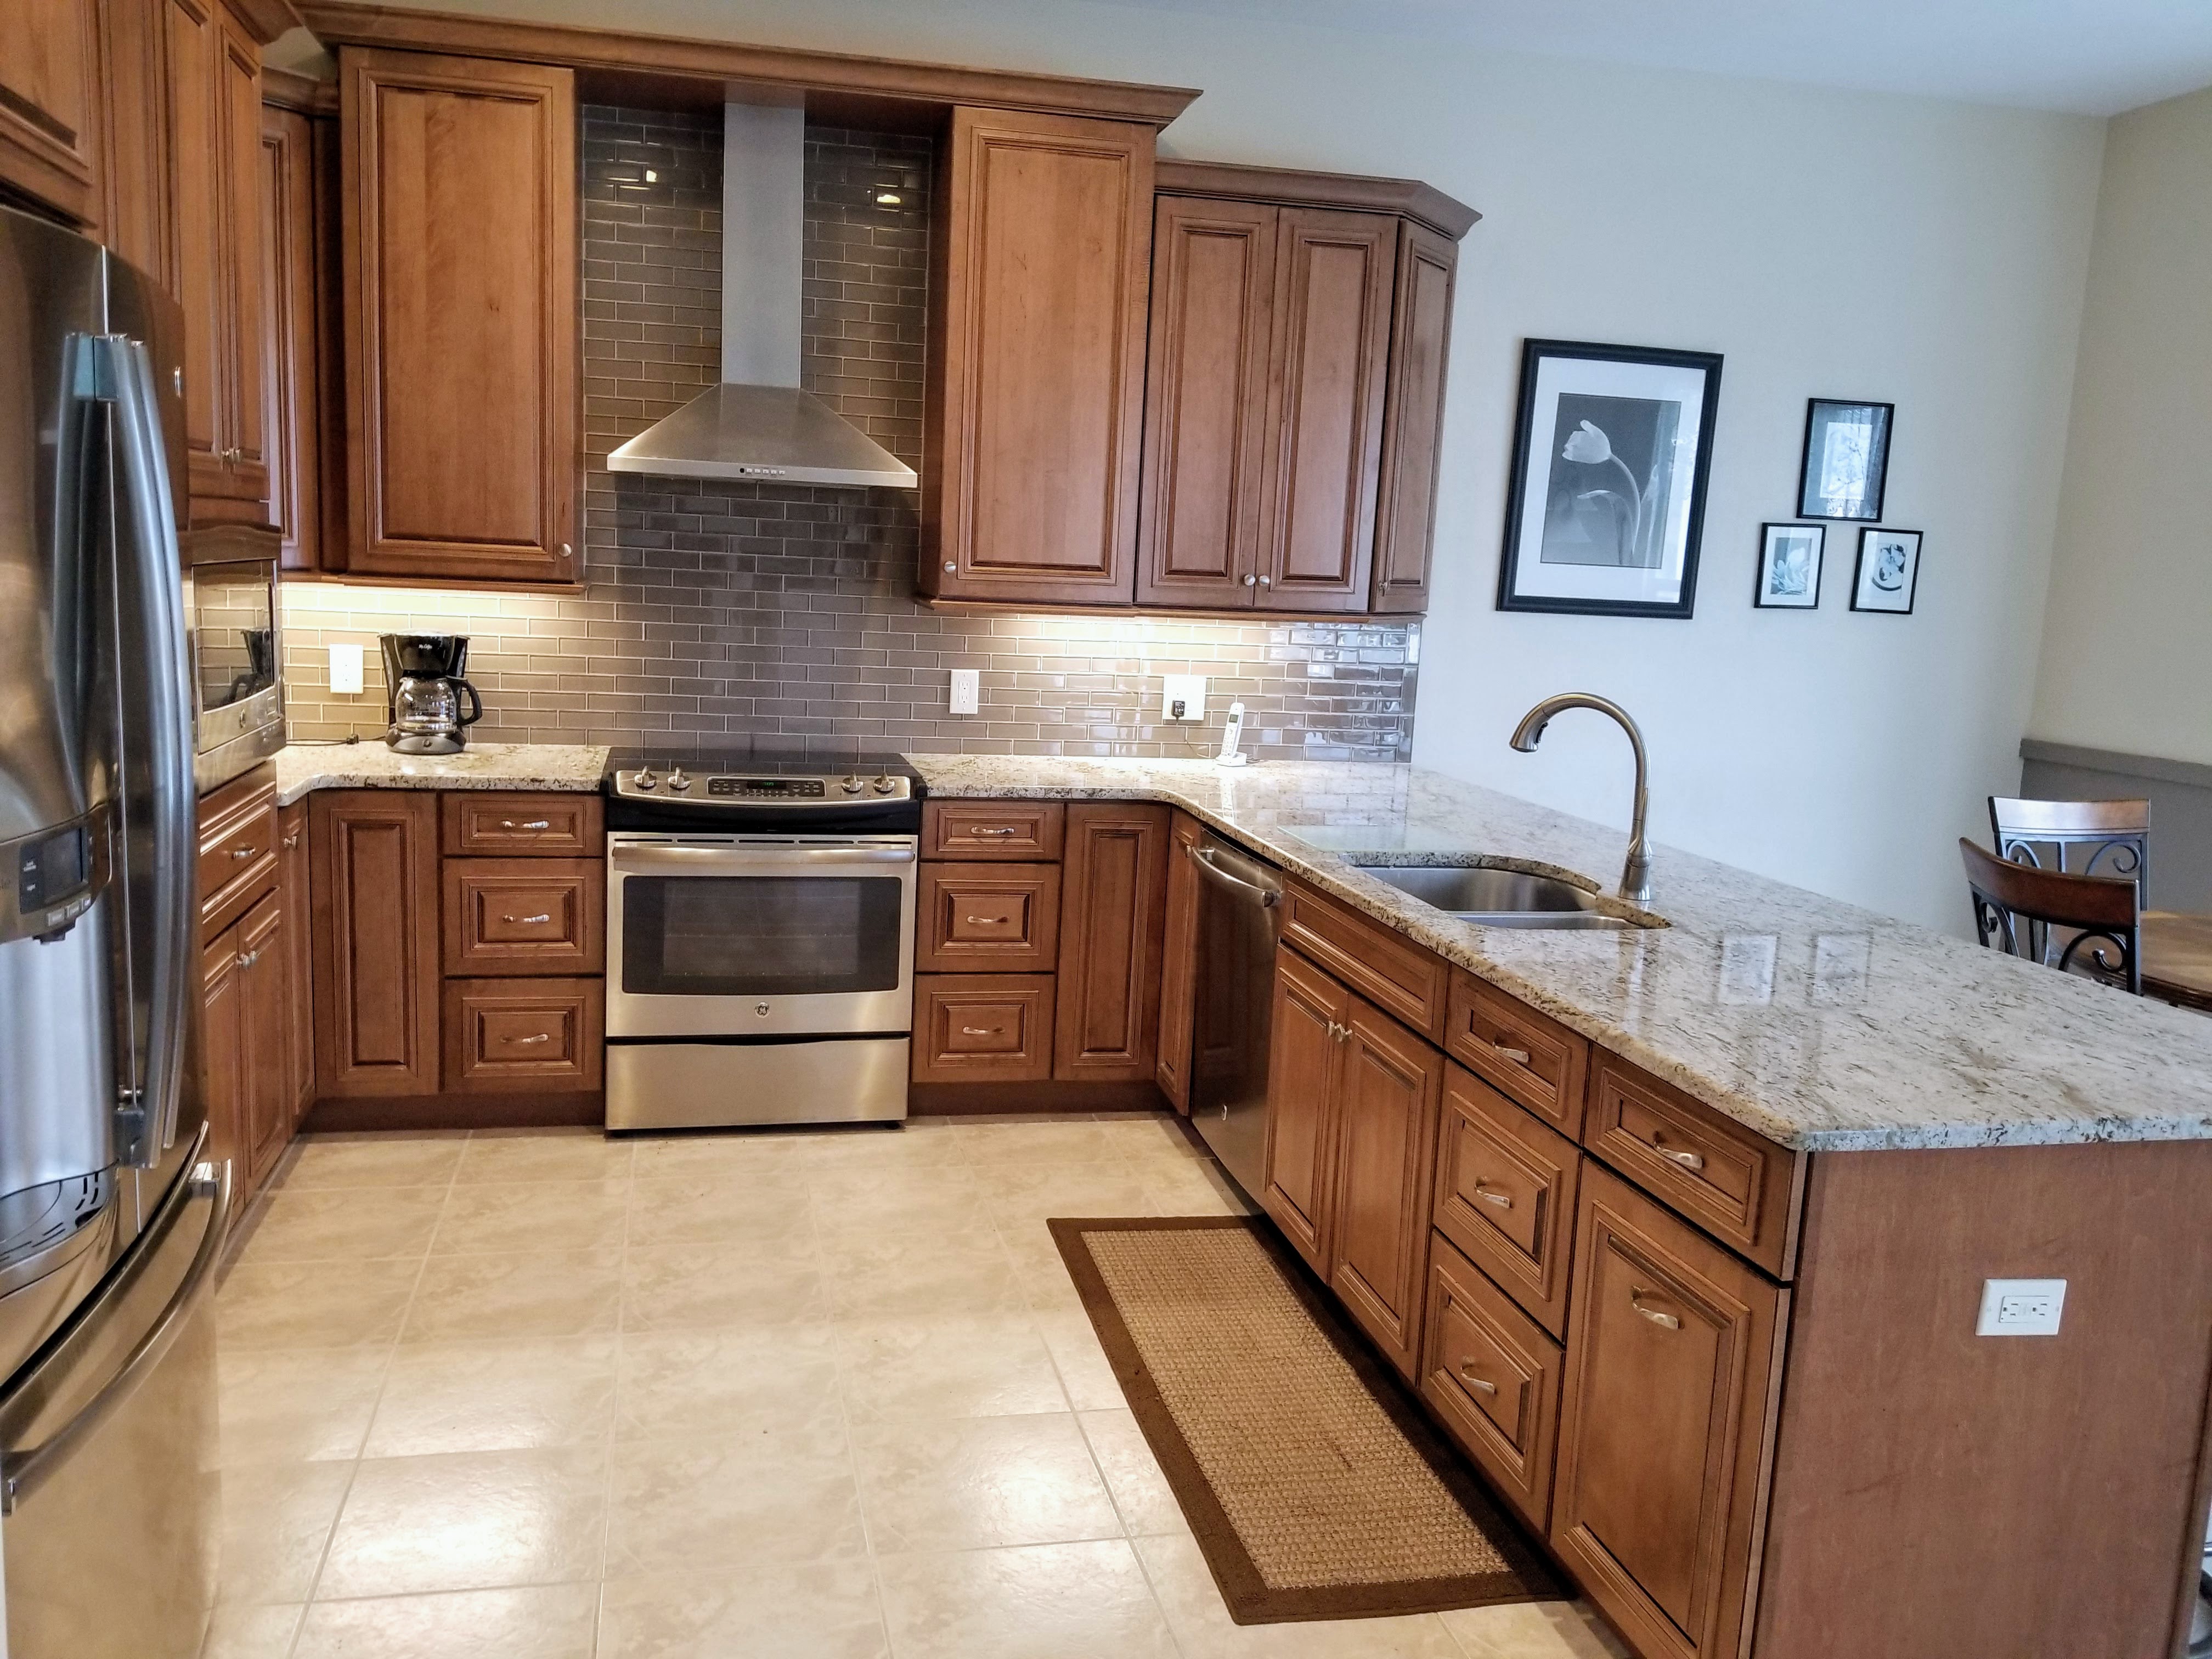 Recently remodeled kitchen